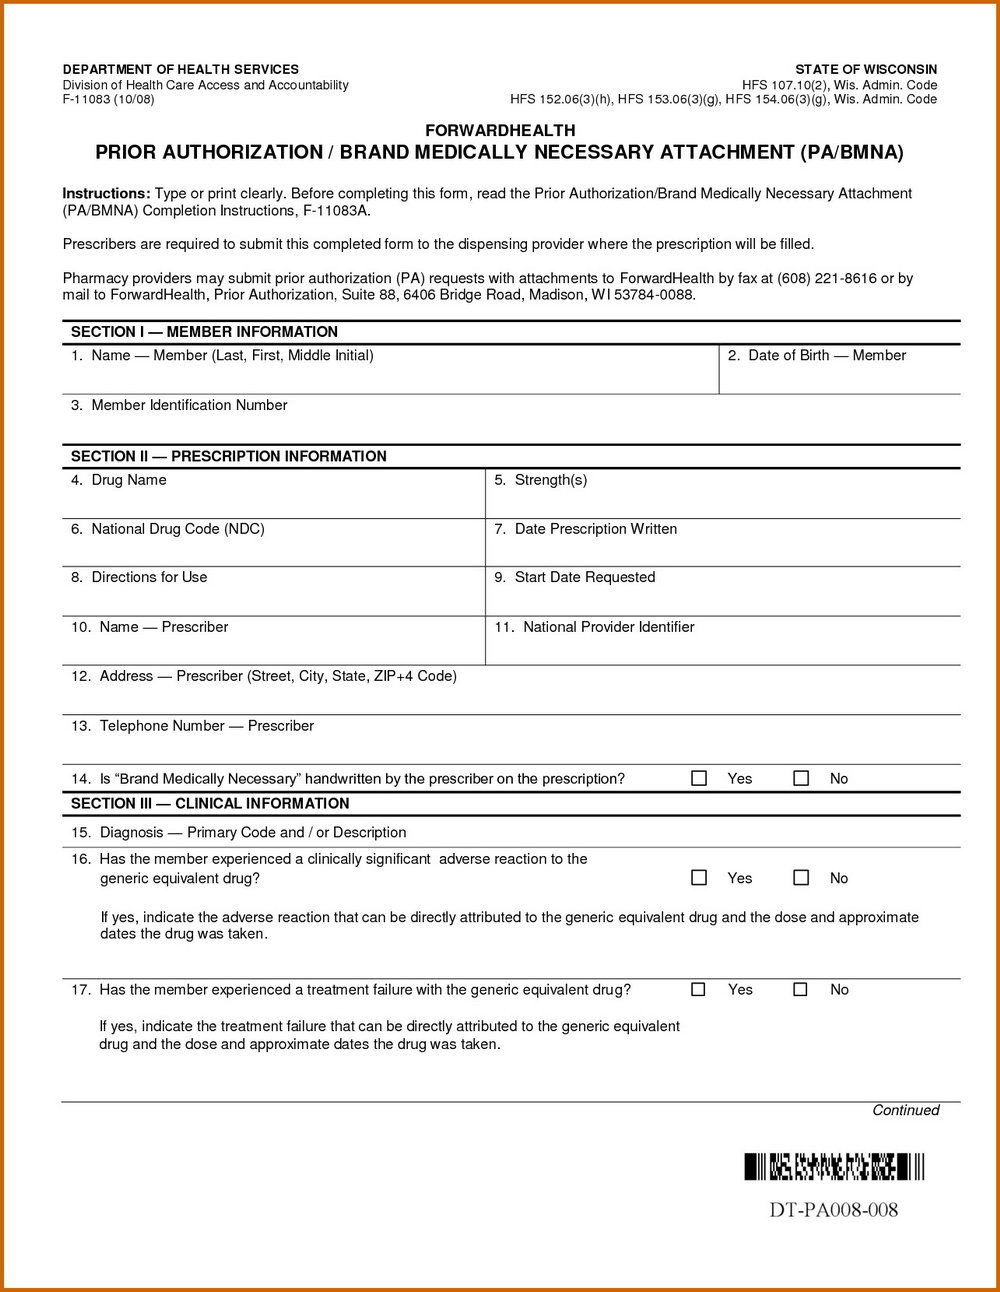 Nys Disability Form Db 450 Part C Forms 4455